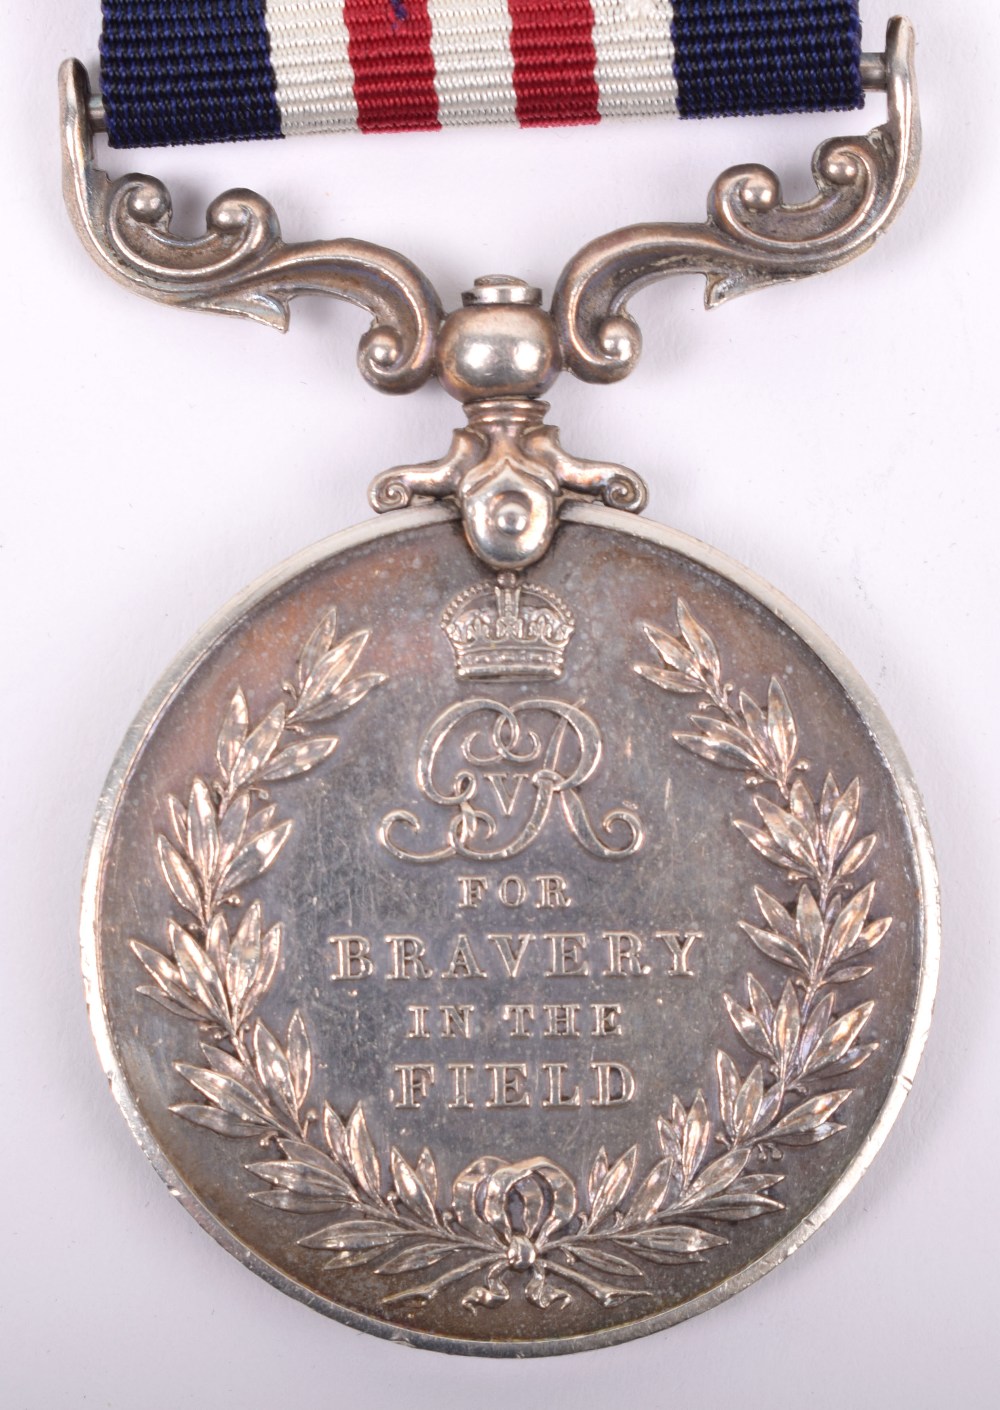 George V Military Medal (M.M) 1/5th Seaforth Highlanders, Awarded for Gallantry in the Attack on Bea - Image 6 of 6